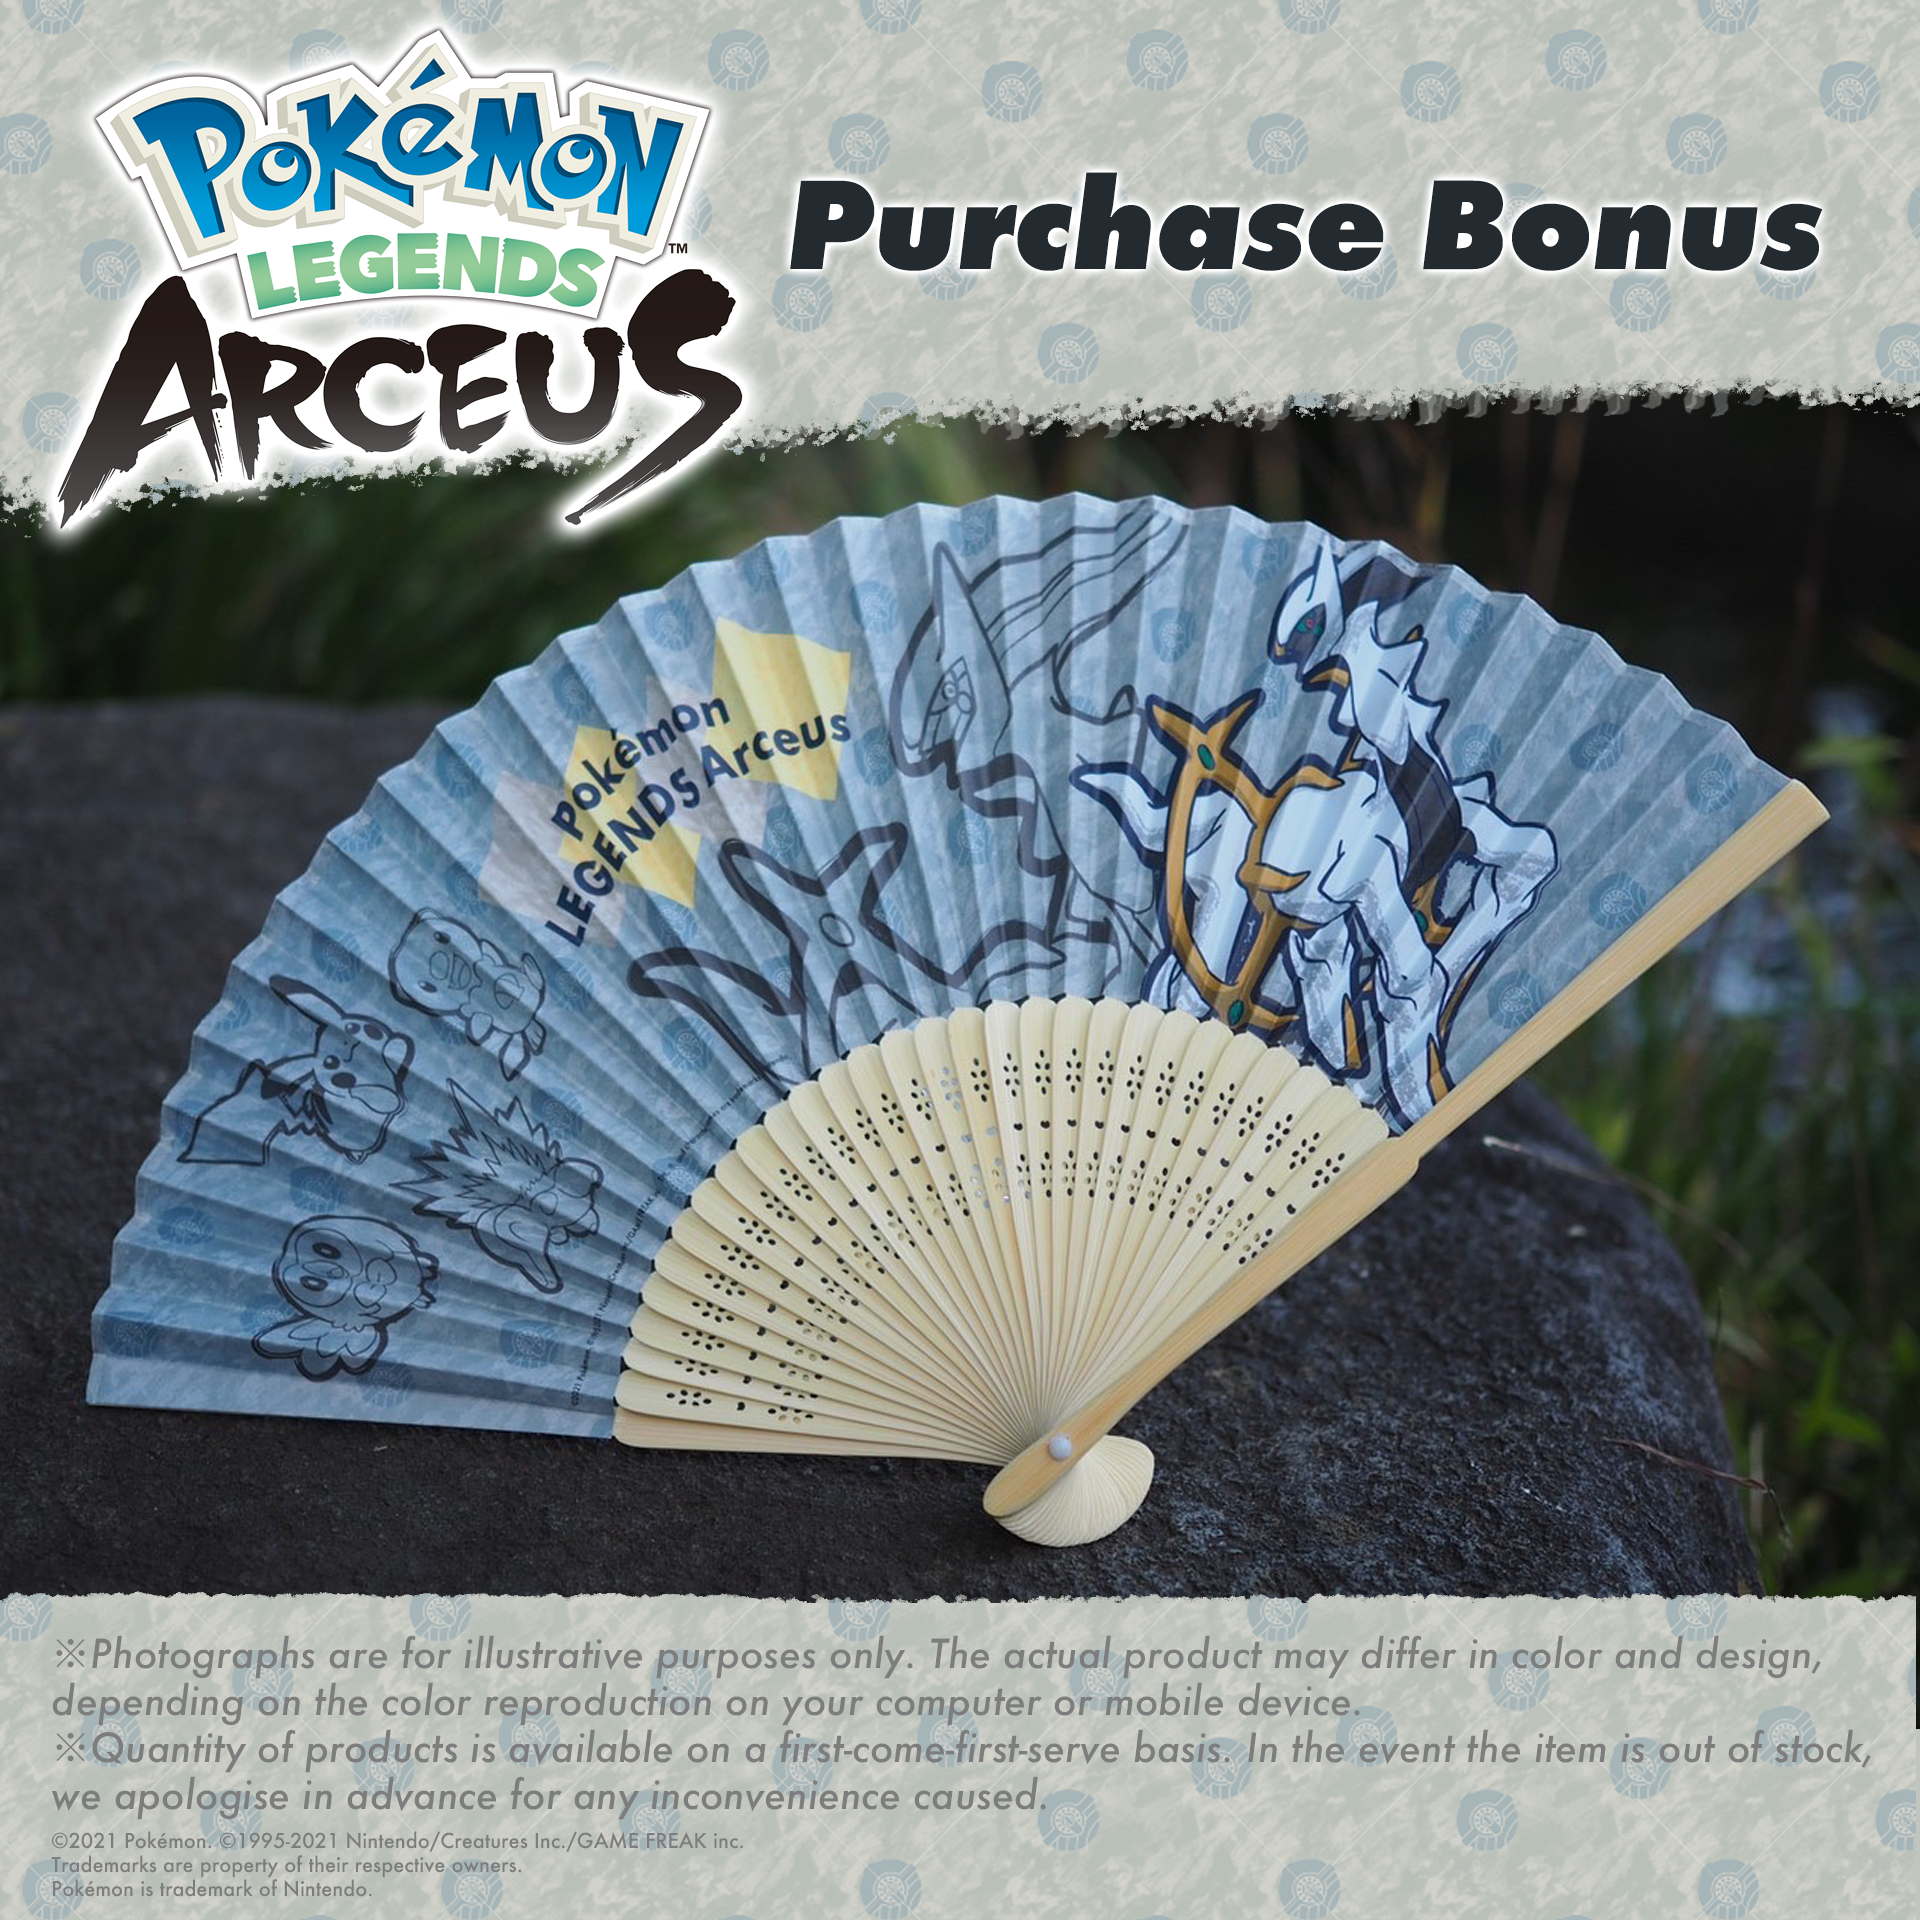 Pokemon Legends: Arceus Print - seamonsterhorse's Ko-fi Shop - Ko-fi ❤️  Where creators get support from fans through donations, memberships, shop  sales and more! The original 'Buy Me a Coffee' Page.